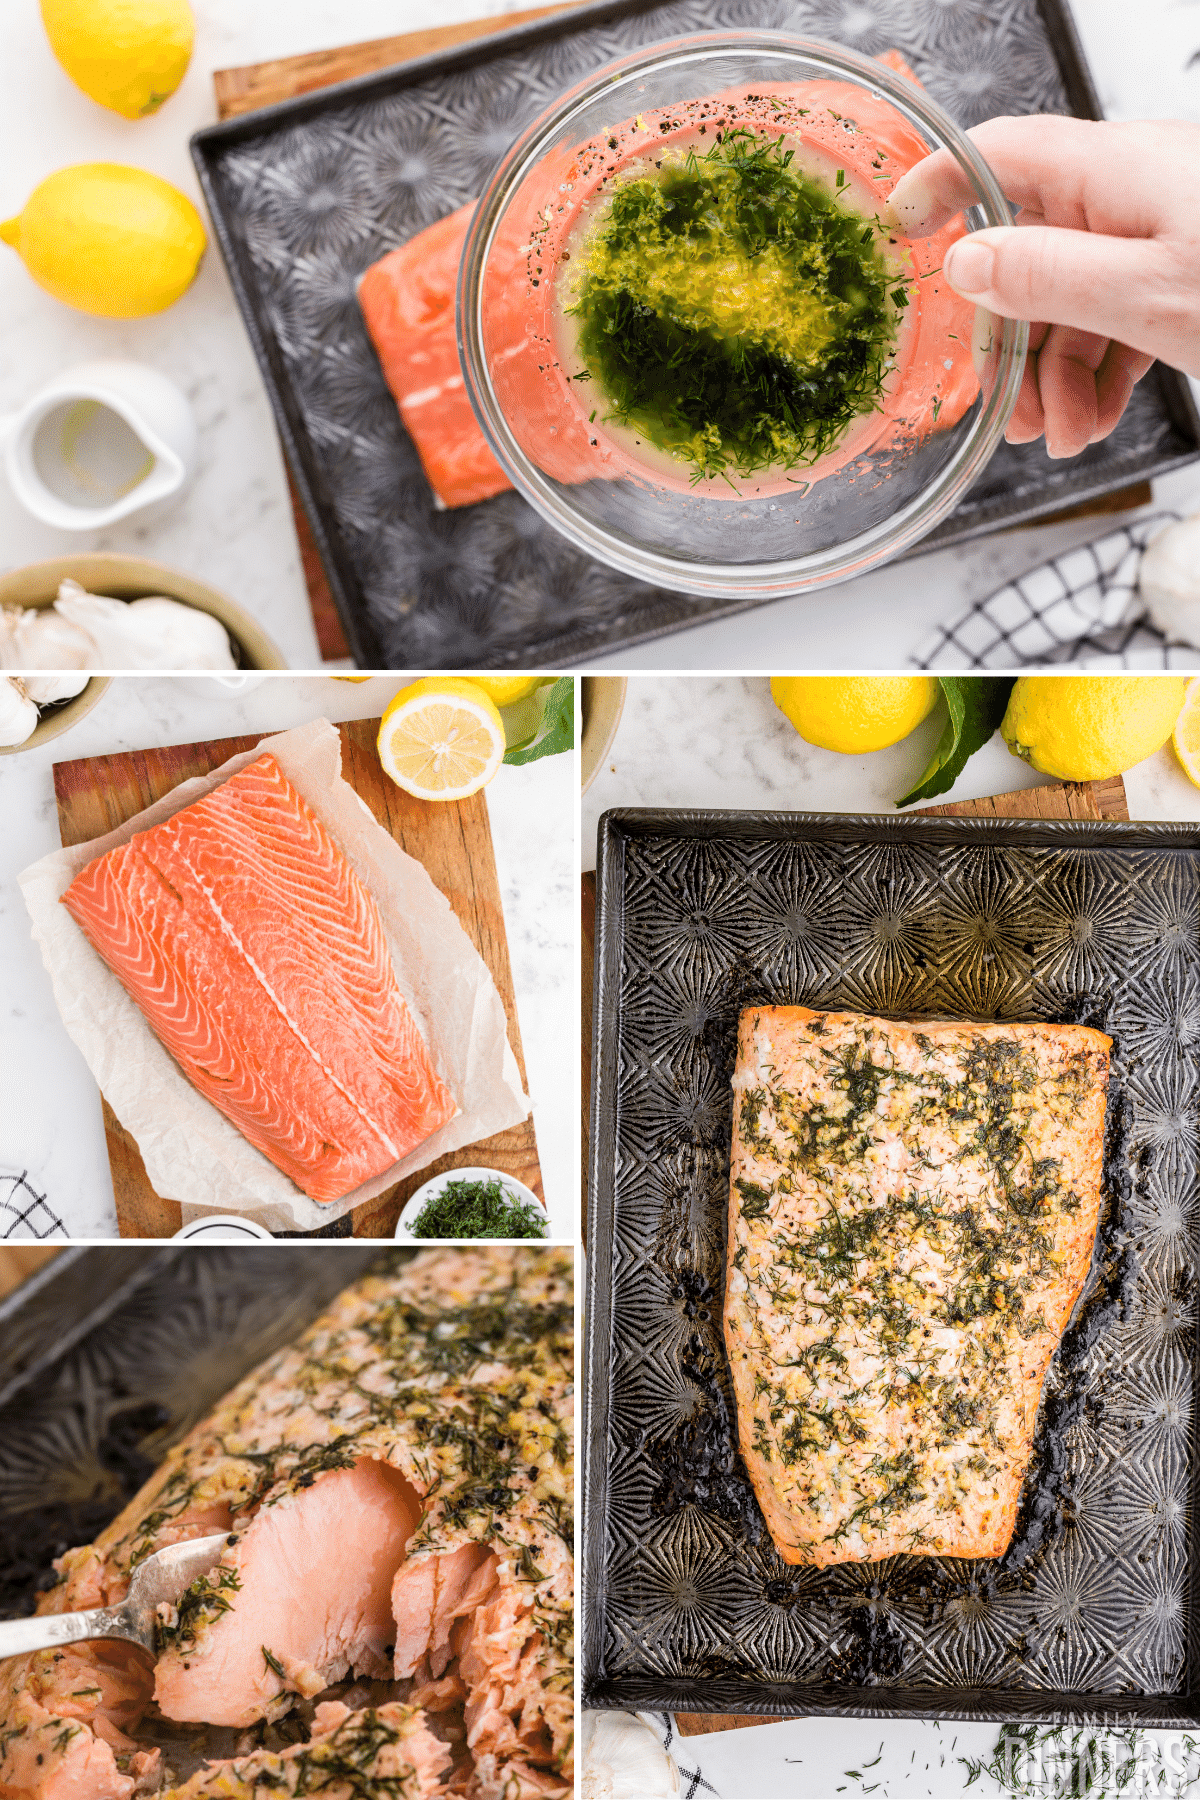 baked salmon with lemon collage - top raw salmon with bowl of salmon seasoning of melted butter, garlic, pepper and dill. 2- raw salmon on parchment paper. 3- oven baked salmon covered in dill butter being flaked with a fork. 4- oven baked dill salmon on decorative baking sheet. Cut lemon next to it.